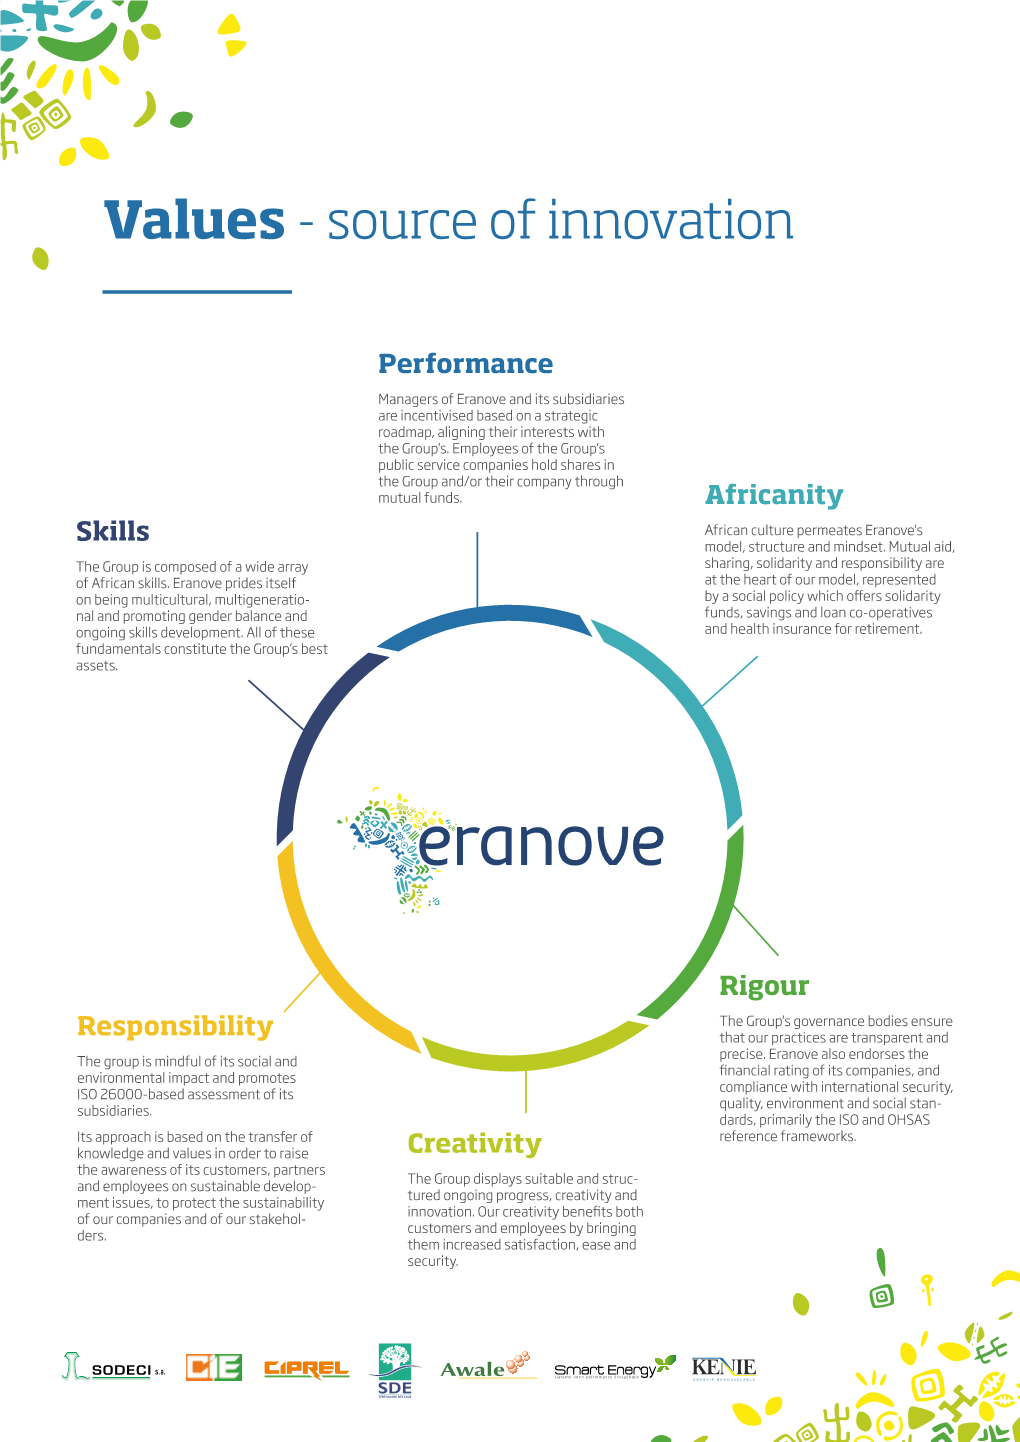 Values - Source of Innovation